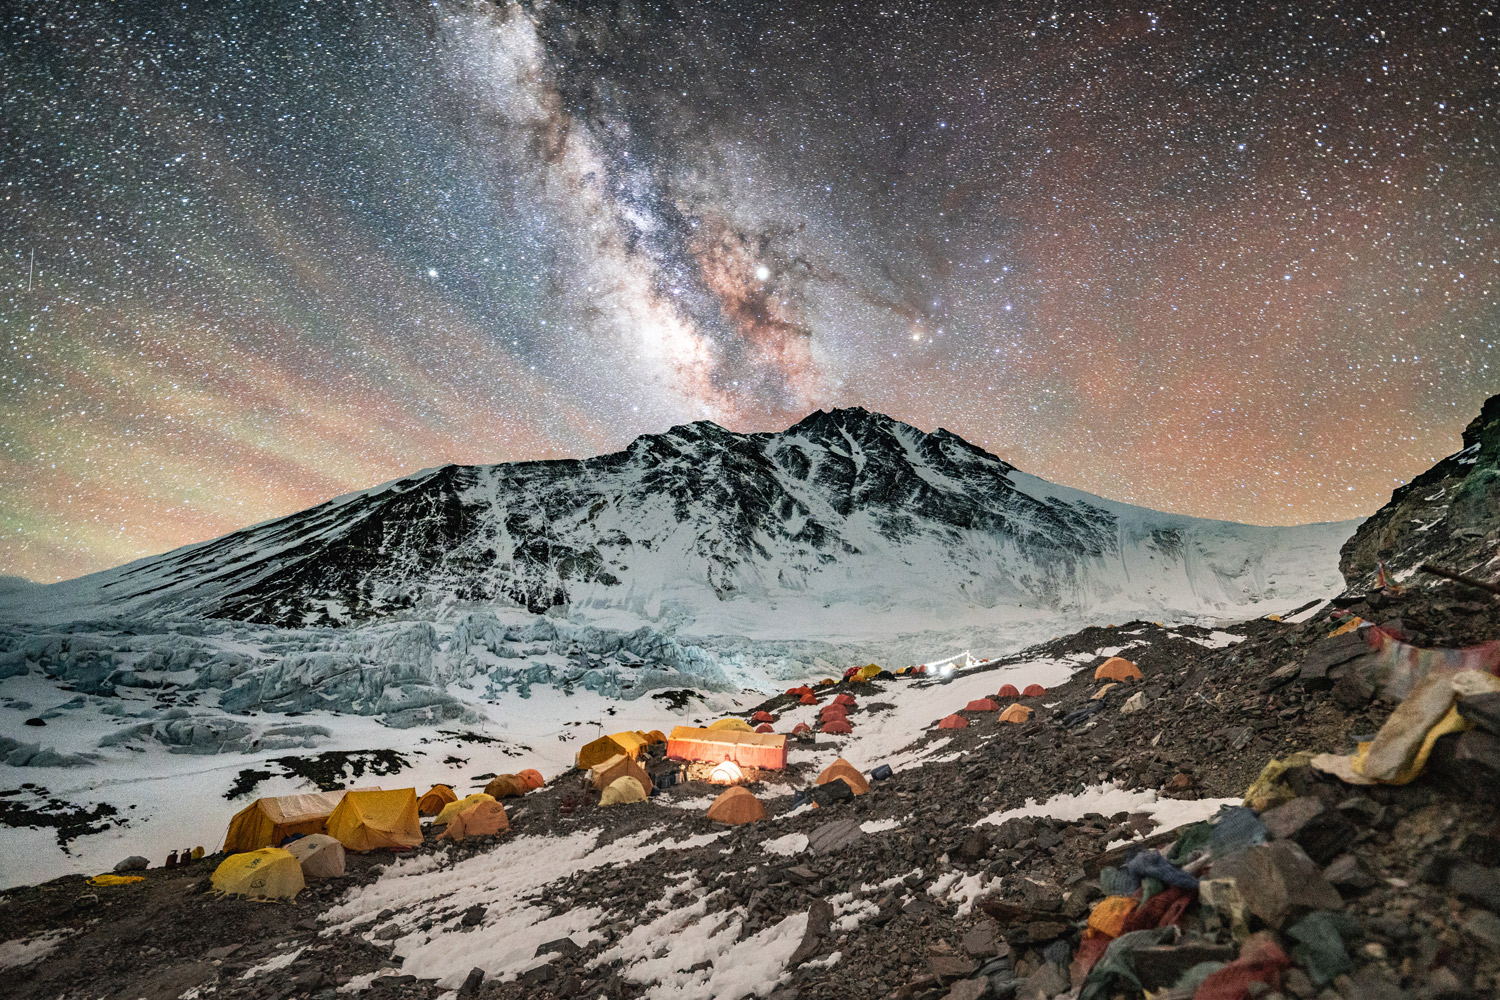 Tents scattered across a snowy mountain peak with a star filled sky. 